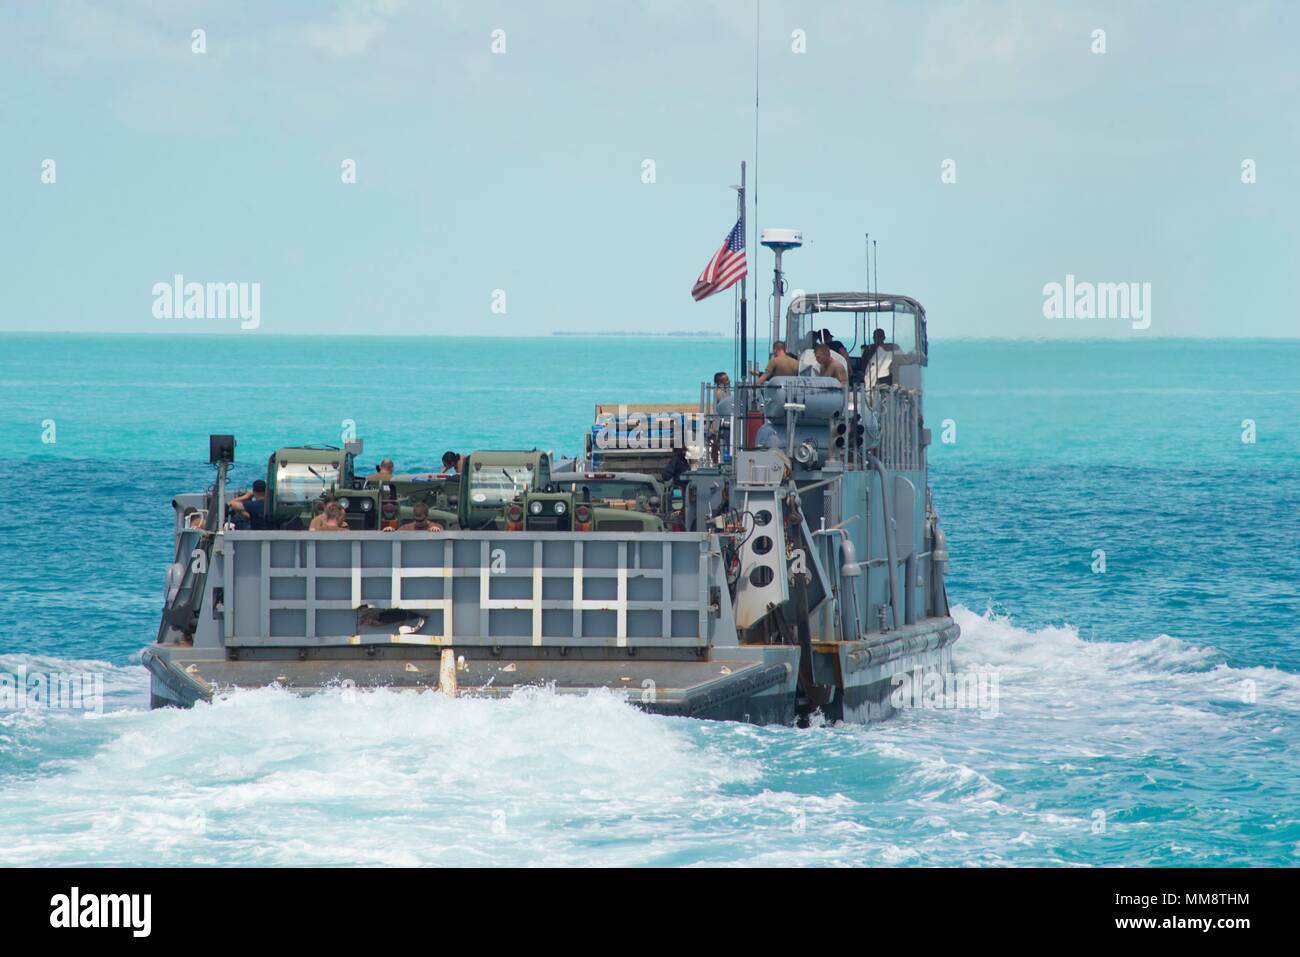 170913-N-DS065-0088 KEY WEST, Fla. (Sept. 13, 2017) A Landing Craft Unit, attached to Assault Craft Unit (ACU) 2, heads to shore in Key West, Fla., with Sailors from the amphibious assault ship USS Iwo Jima (LHD 7) and supplies slated for use in humanitarian assistance efforts following Hurricane Irma’s landfall in Key West. The Department of Defense is supporting Federal Emergency Management Agency, the lead agency, in helping those affixed by Hurricane Irma to minimize suffering and as one component of the overall whole-of-government response efforts. (U.S. Navy photo by Mass Communication S Stock Photo